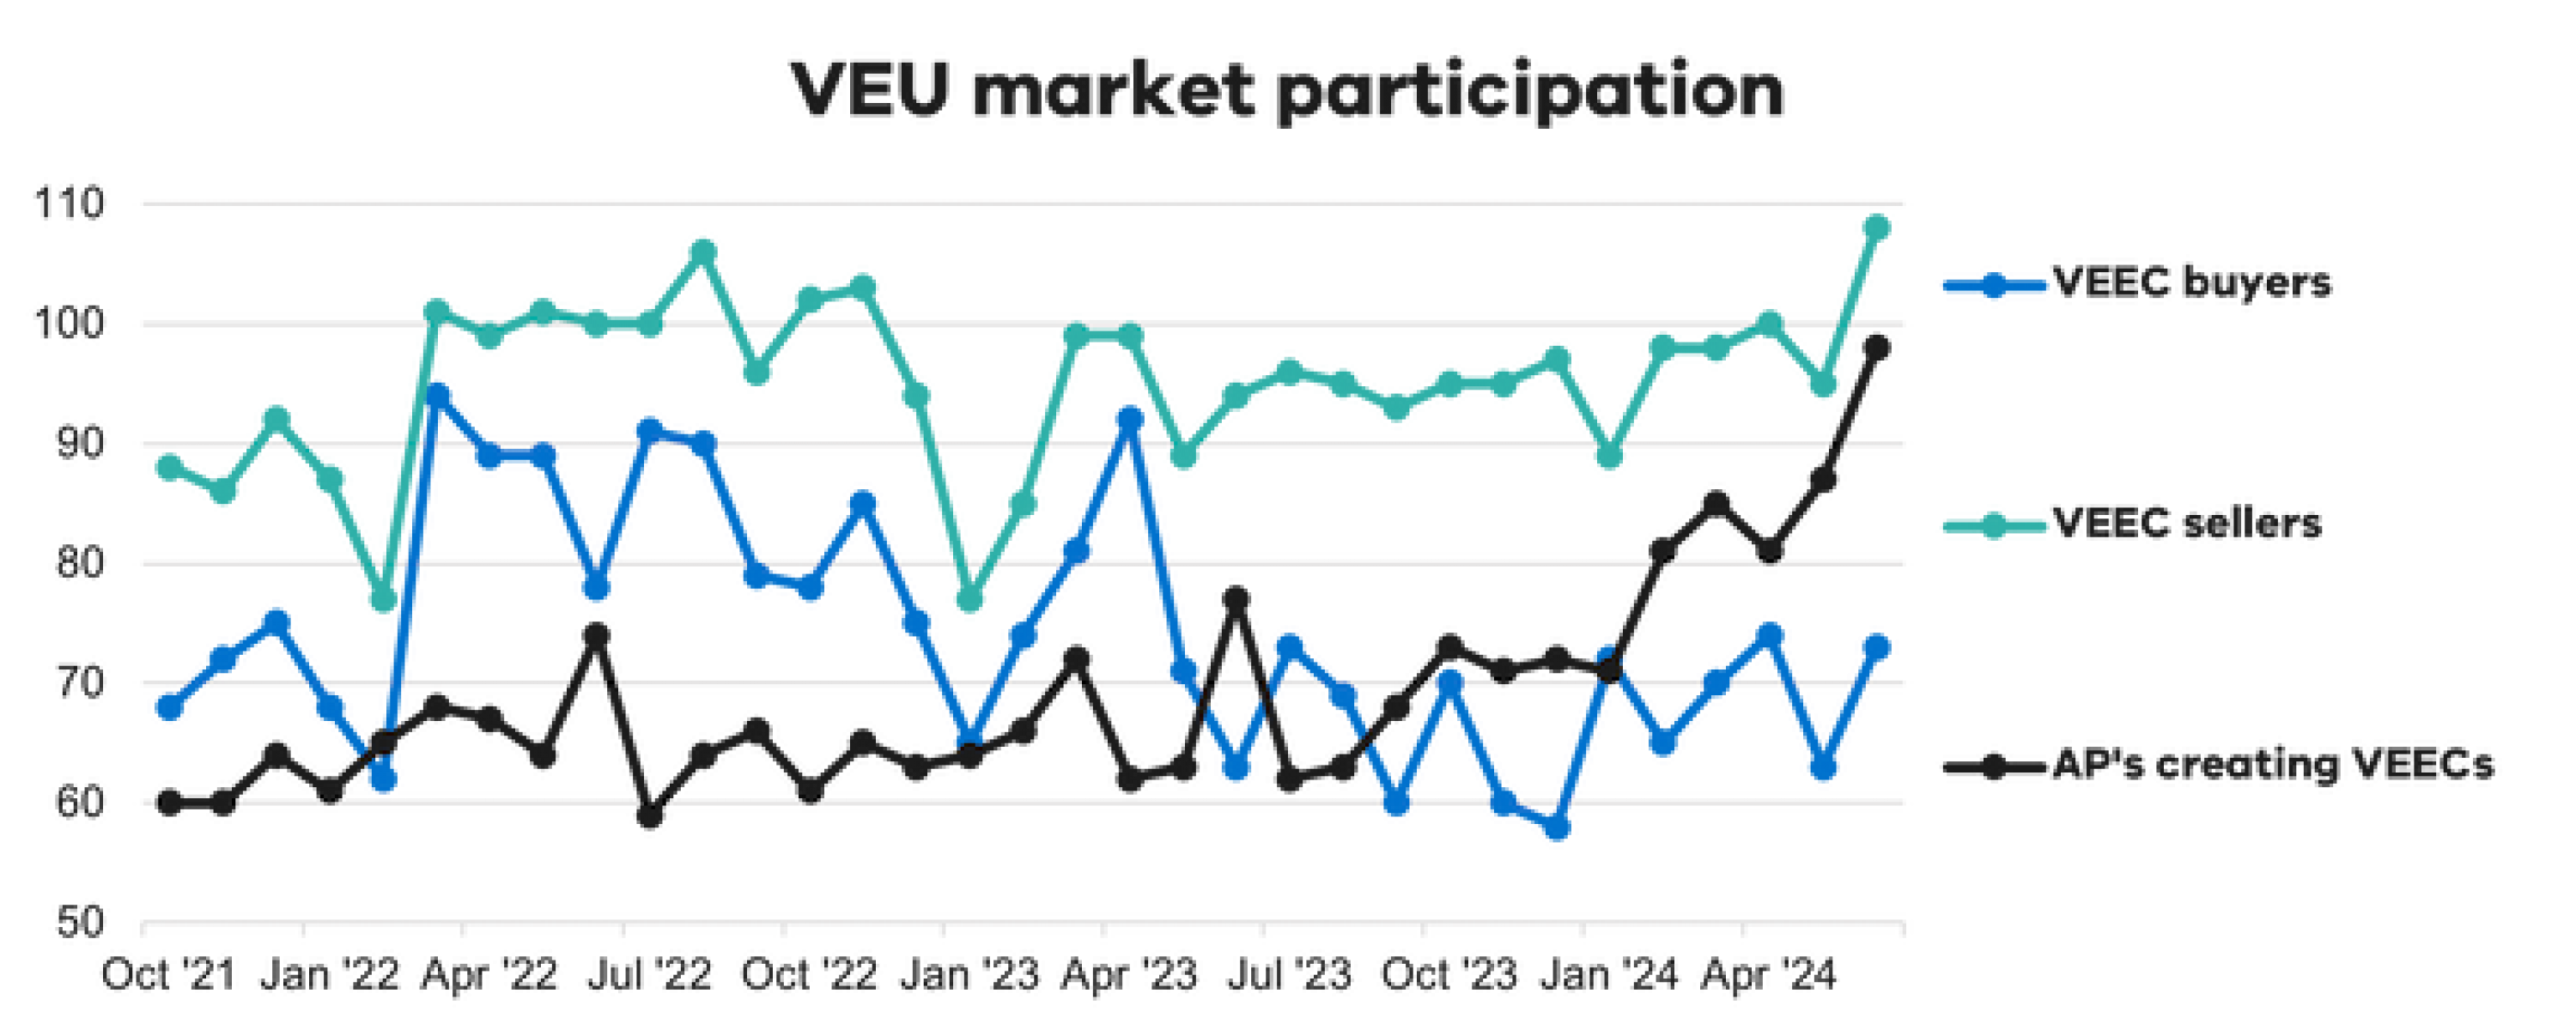 A graph showing the number of market participants in the VEU program